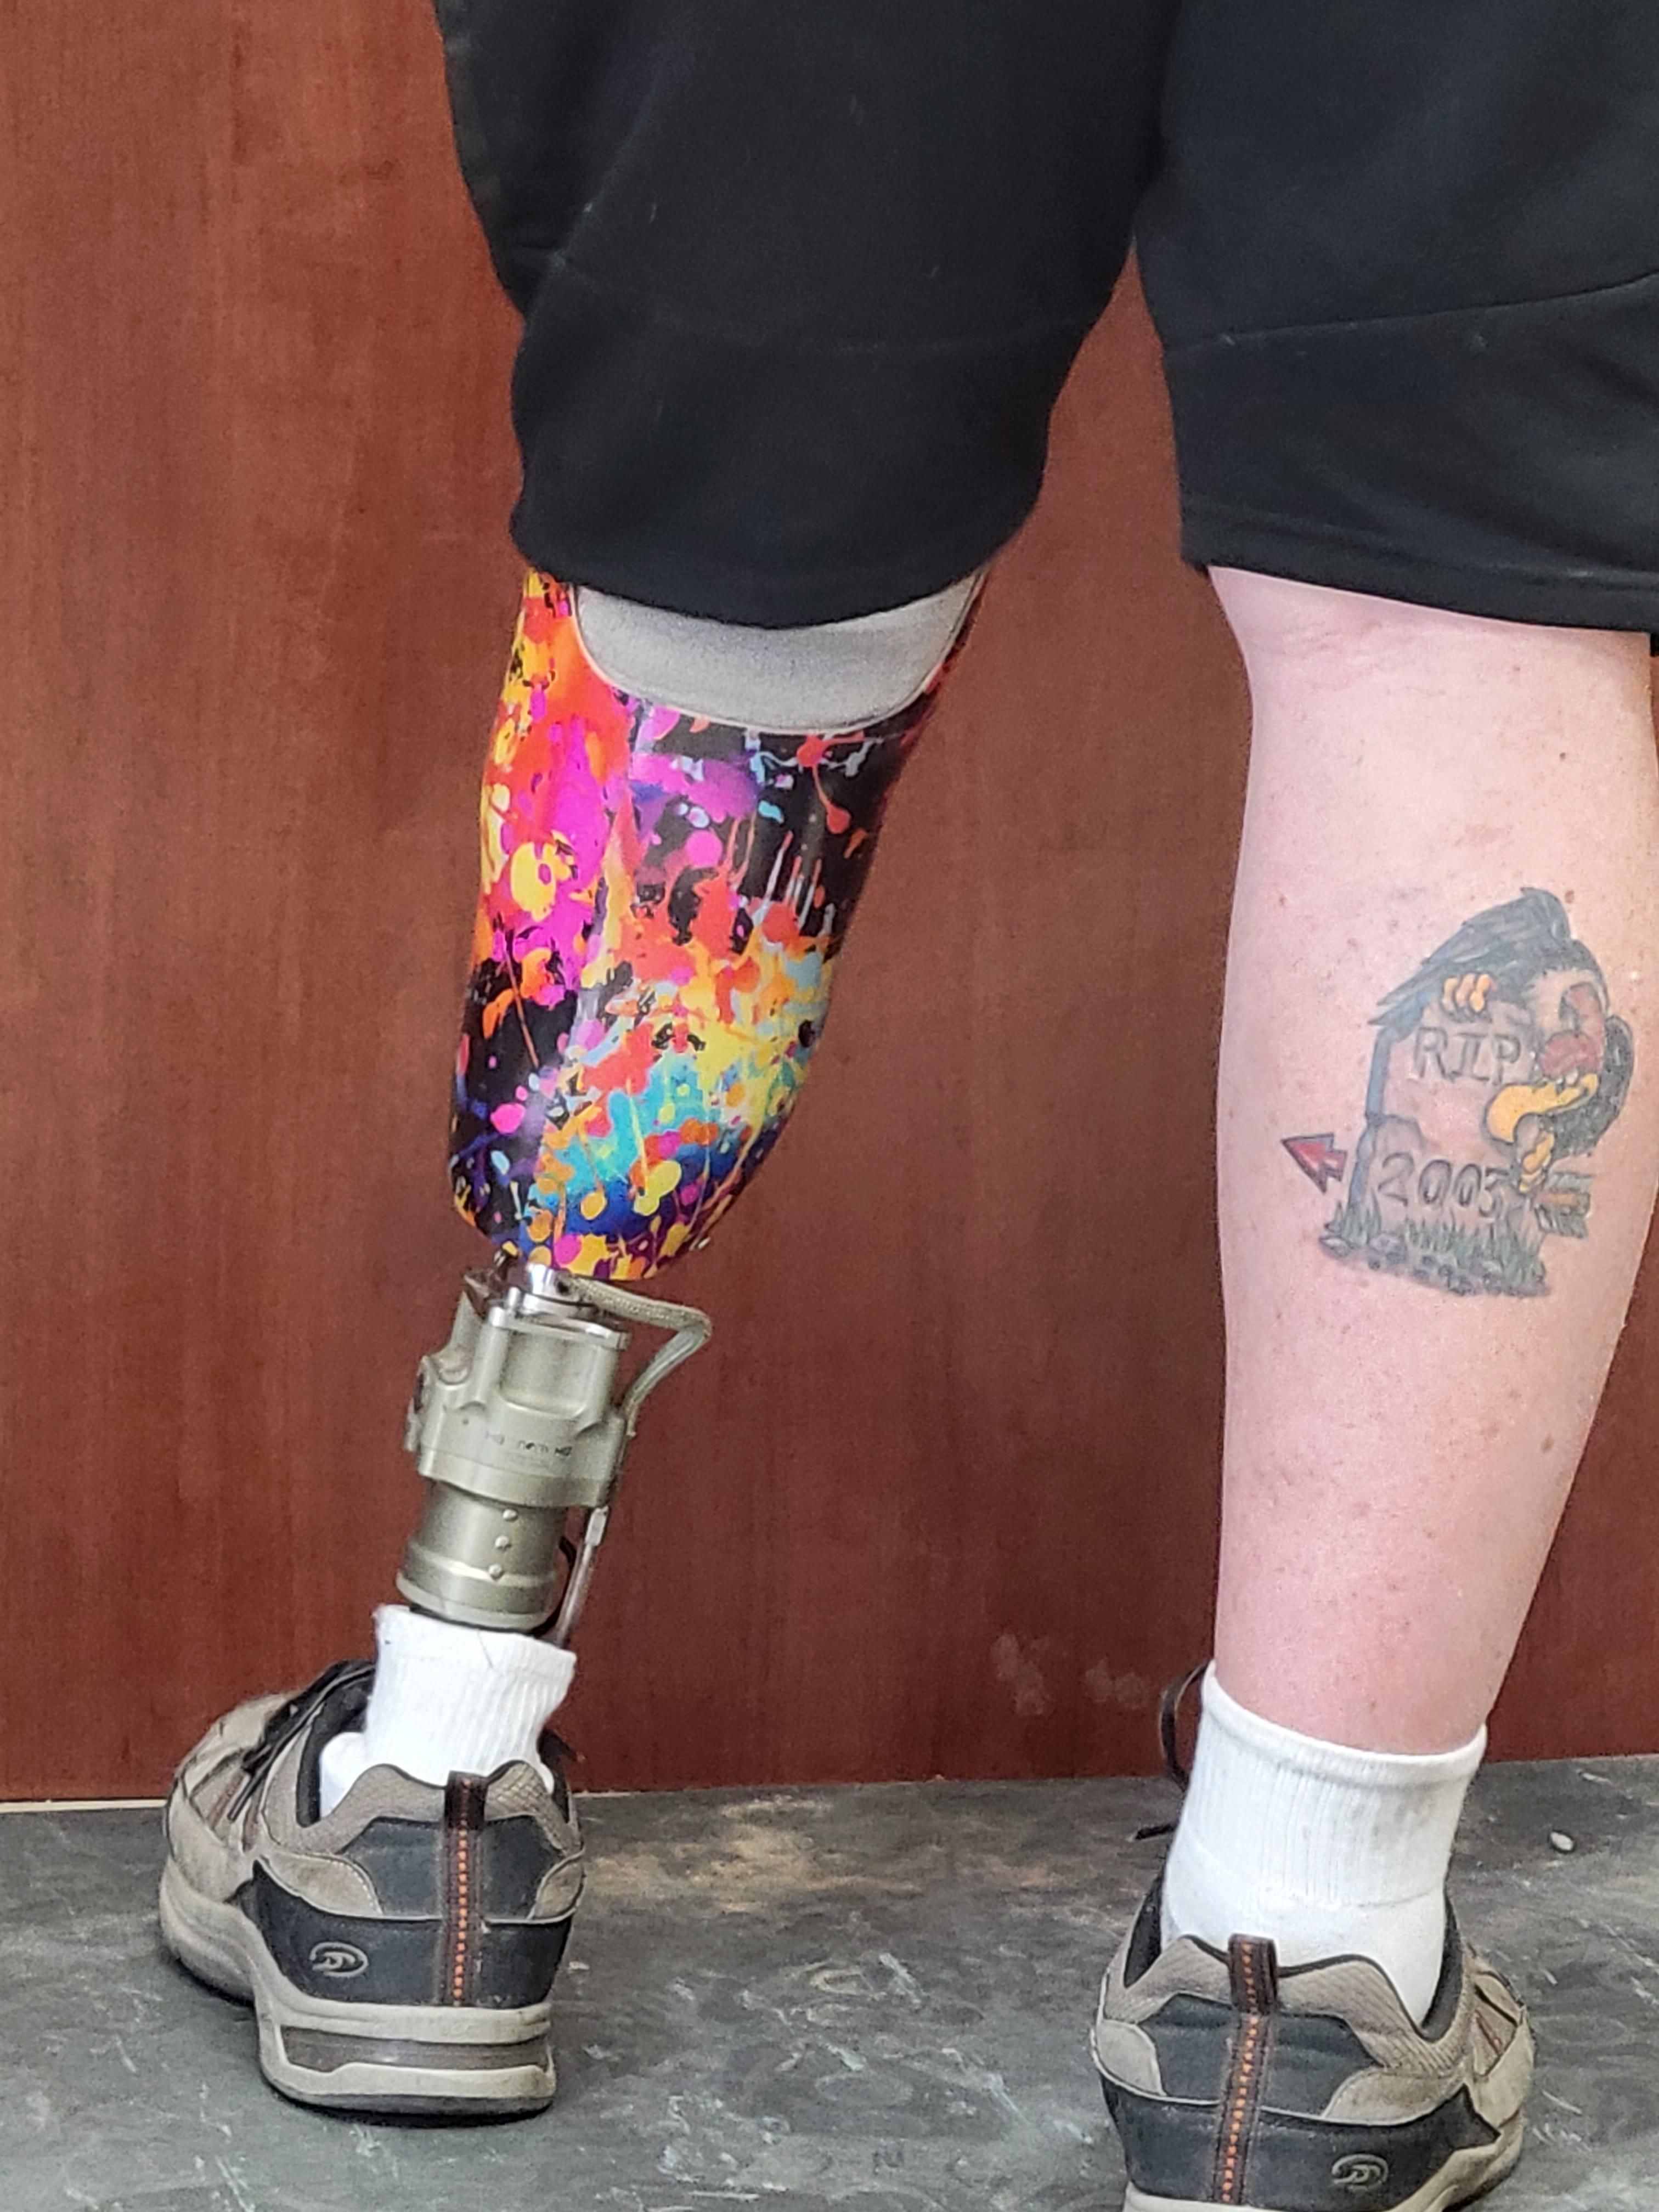 This guy's tattoo and sense of humor for tragedy.